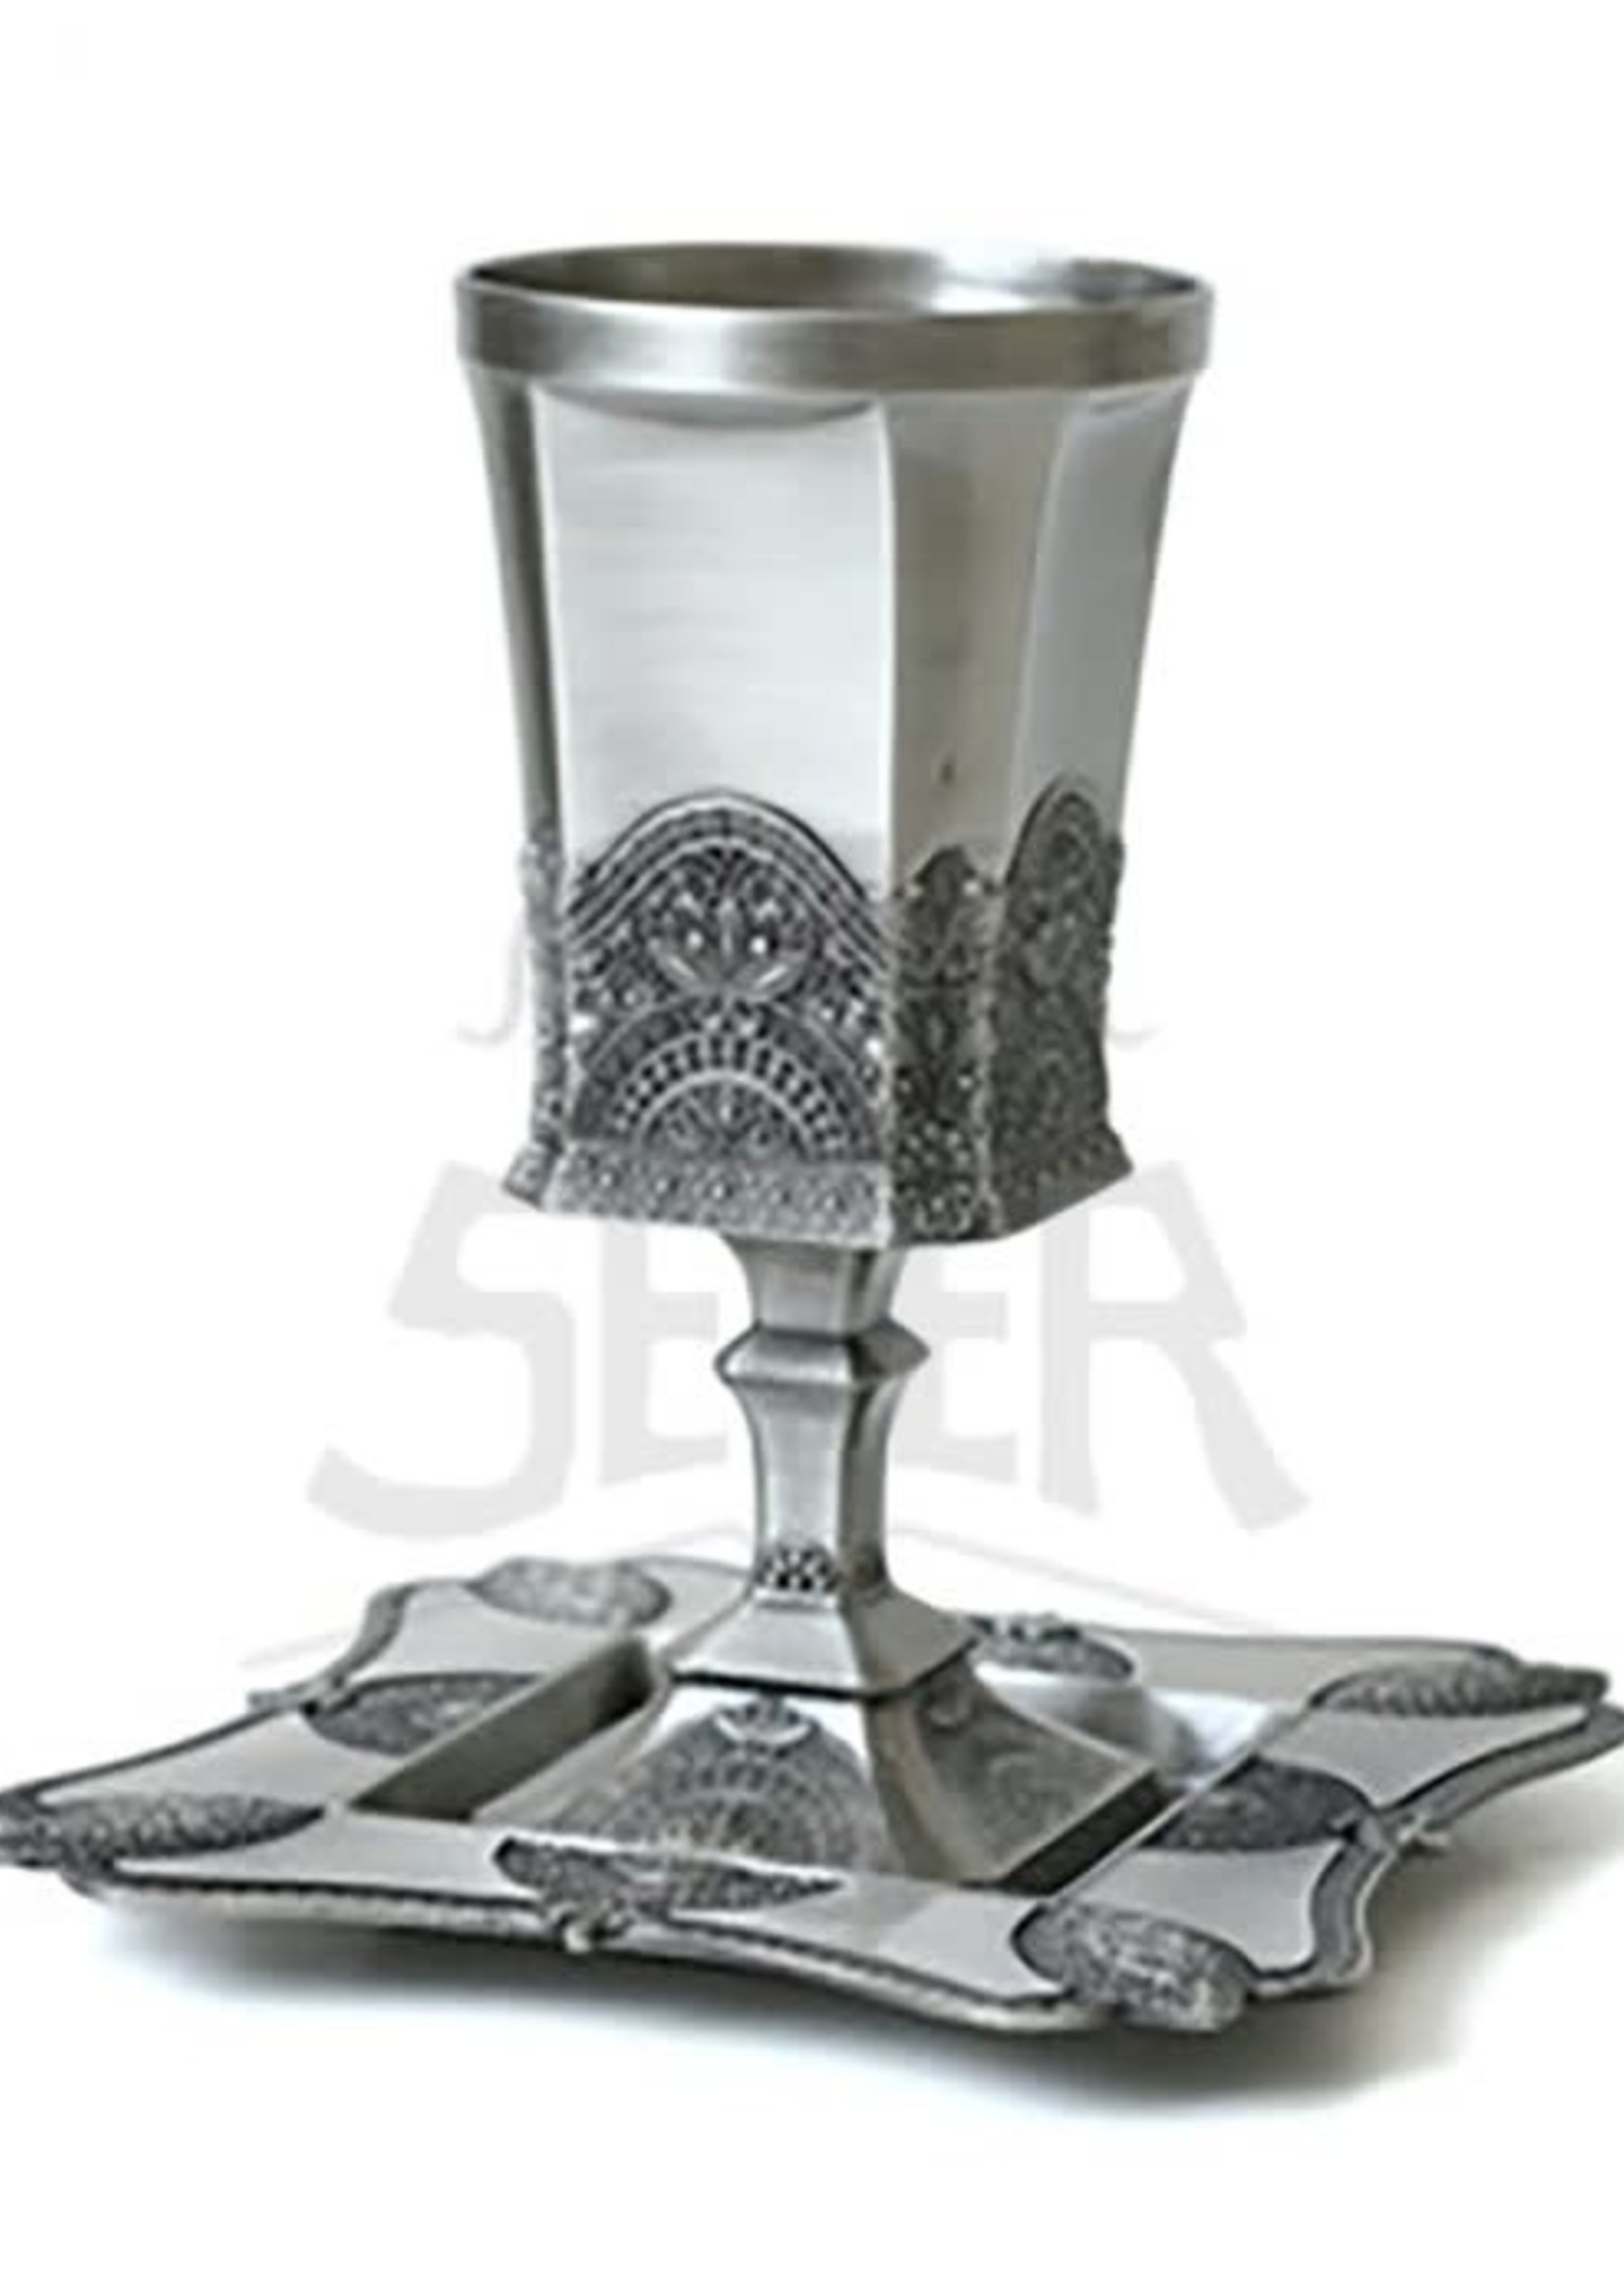 Kiddush Cup with Stem and Matching Tray Silver Plated Filigree Design